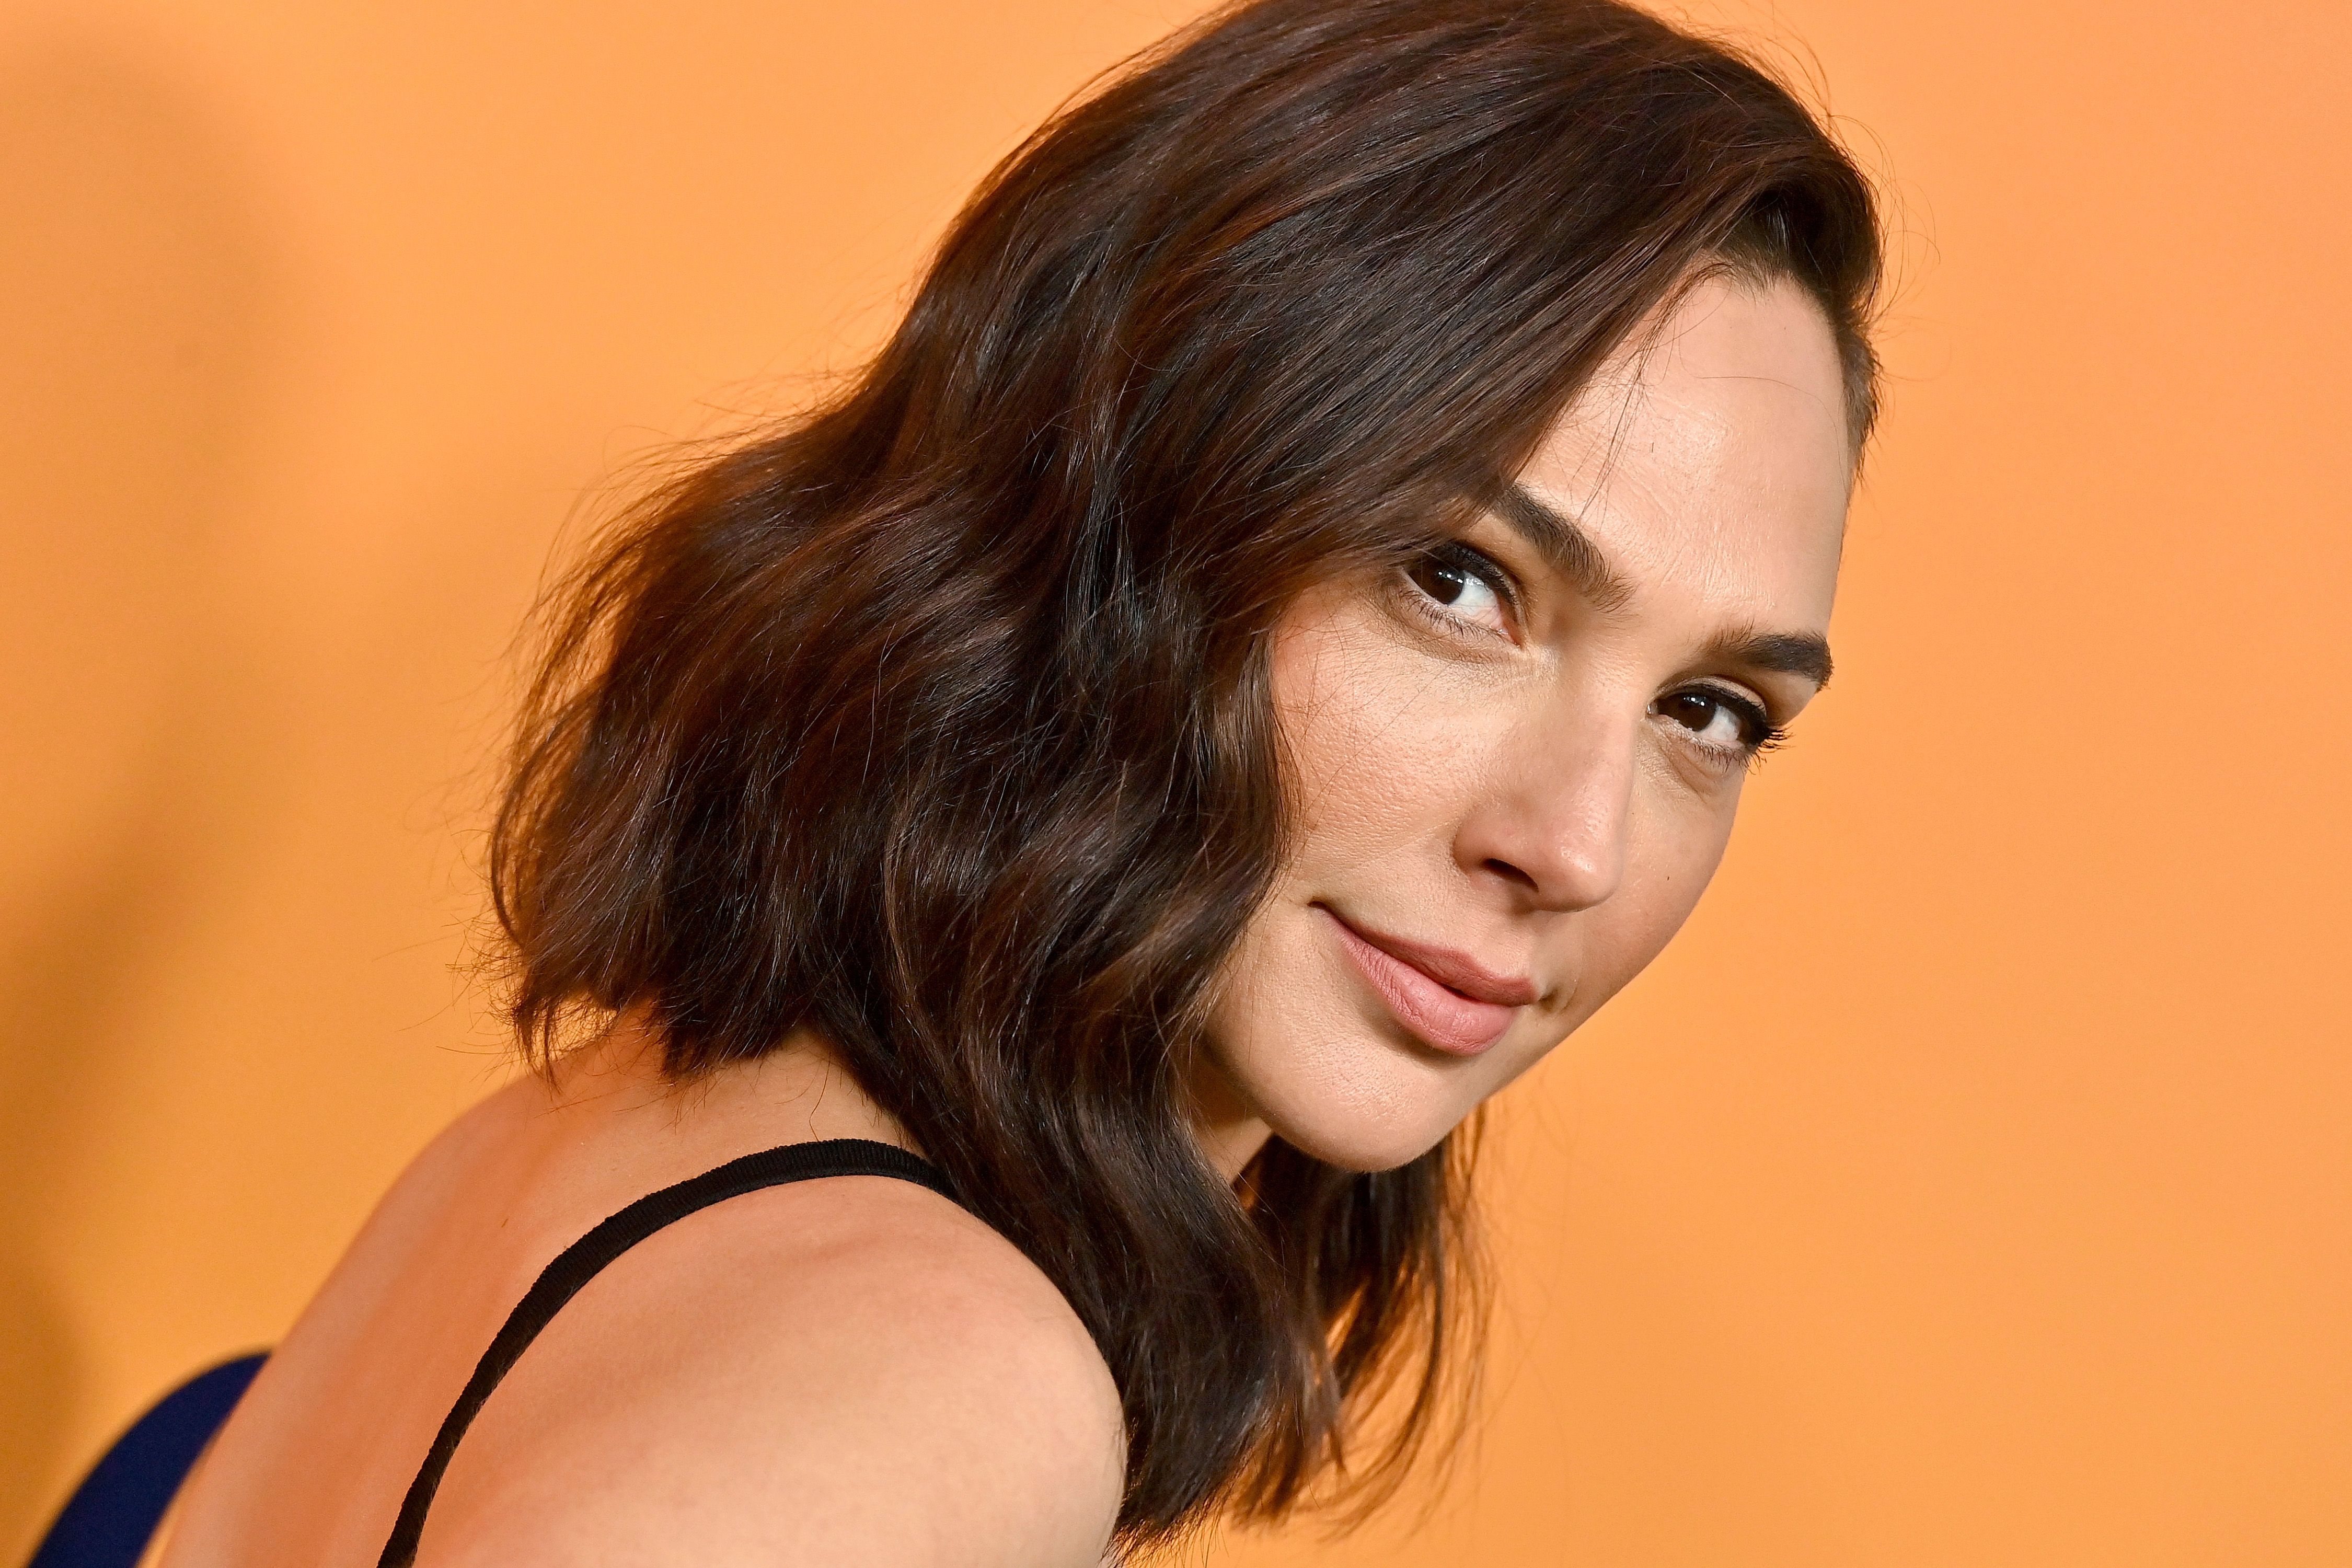 Gal Gadot Nude Porn - Gal Gadot Flashes Her Wonder Woman Abs In A Fun New IG Video